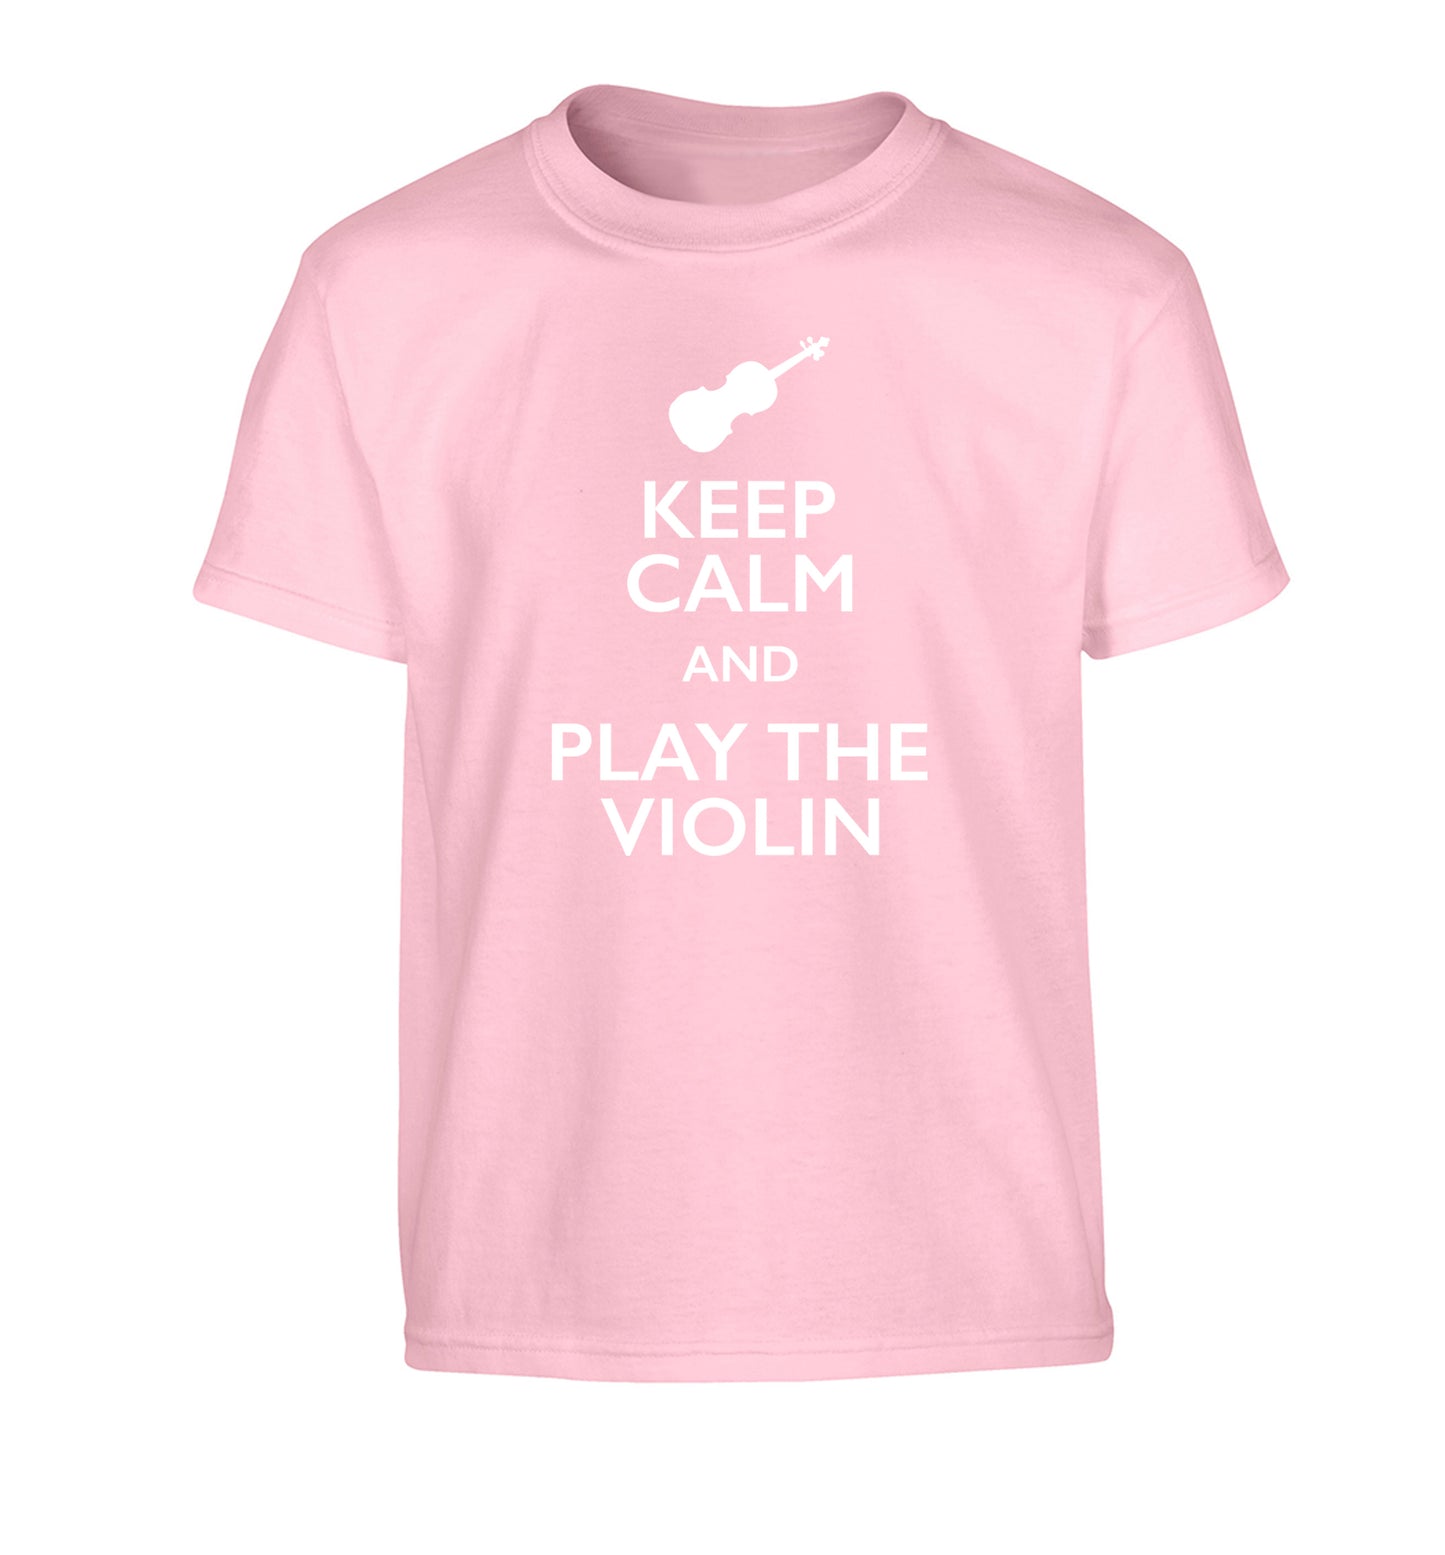 Keep calm and play the violin Children's light pink Tshirt 12-13 Years